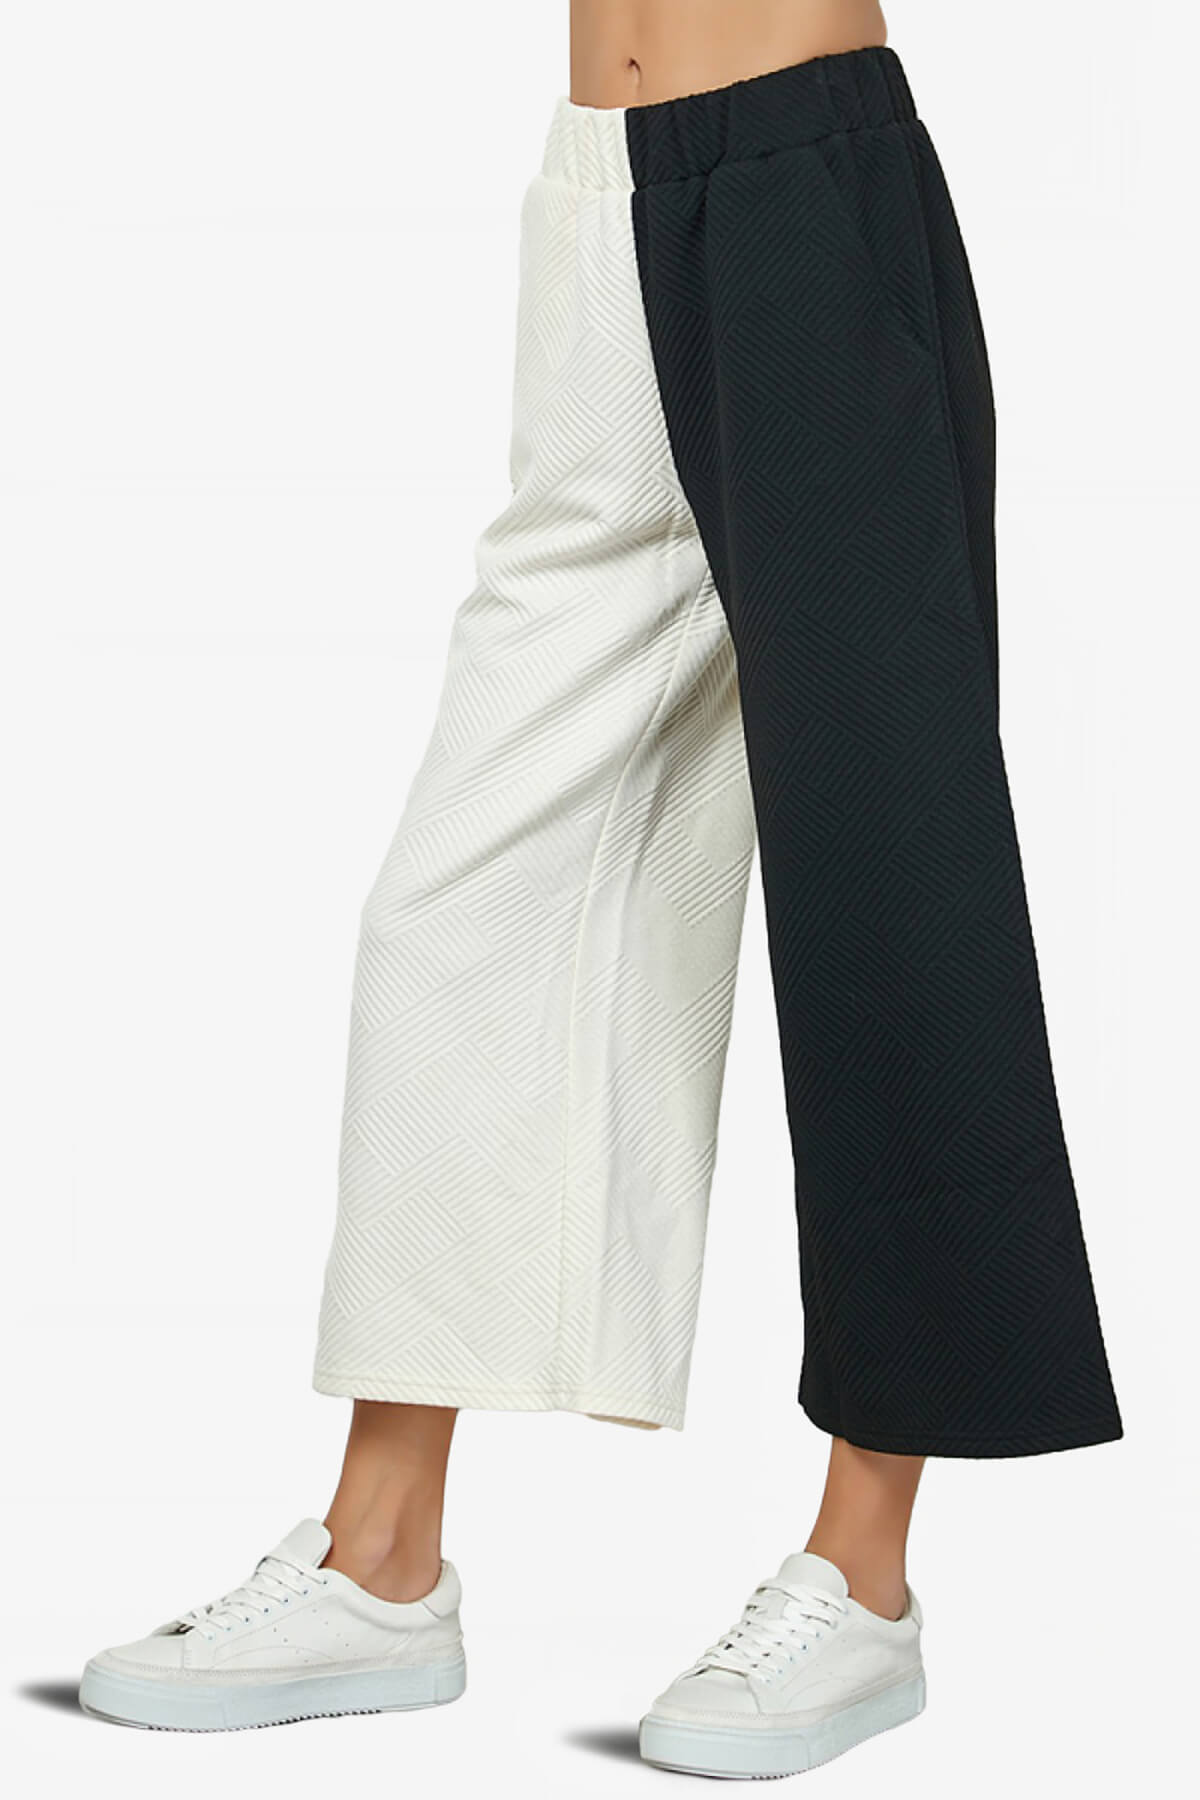 Lassy Textured Colorblock Lounge Culotte BLACK AND WHITE_3